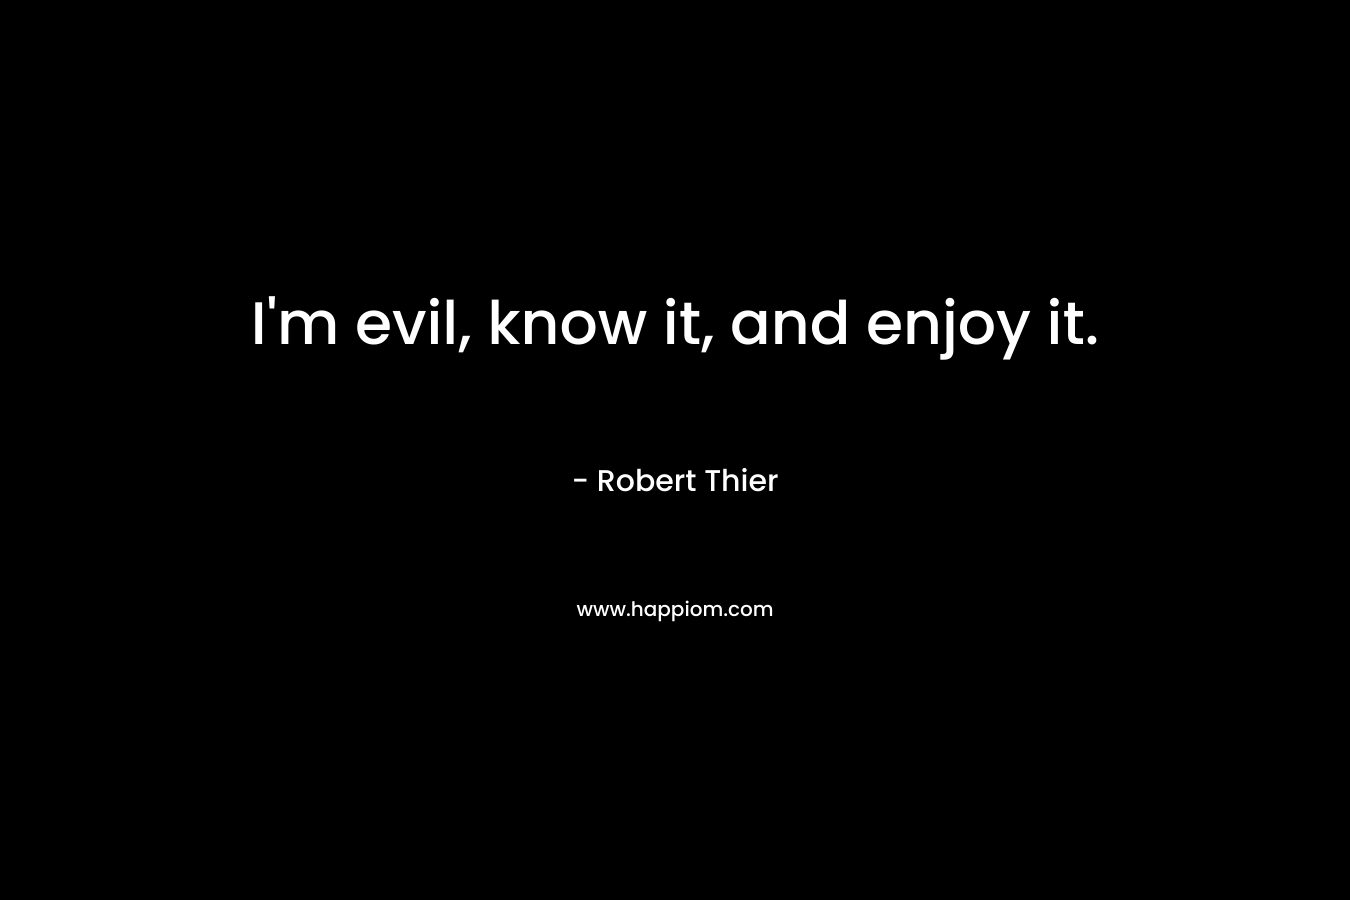 I’m evil, know it, and enjoy it. – Robert Thier